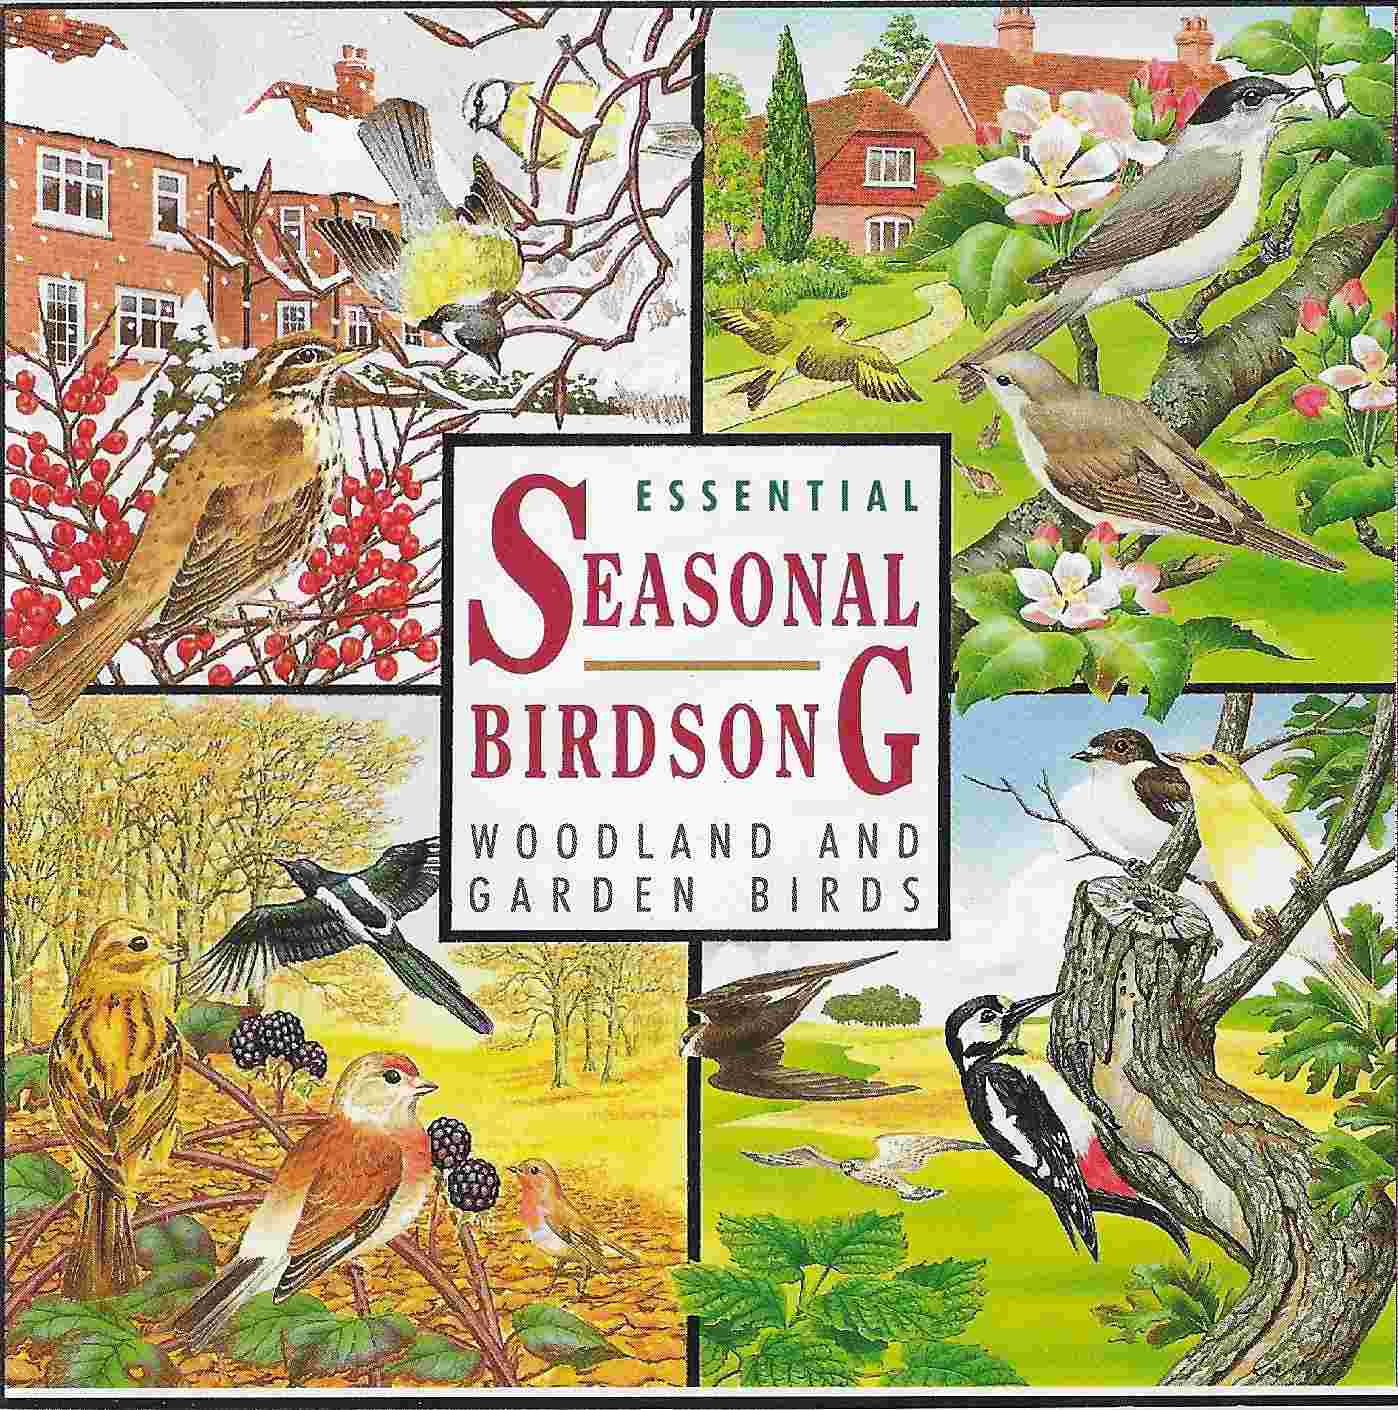 Picture of Essential seasonal birdsong sound effects by artist Various from the BBC cds - Records and Tapes library